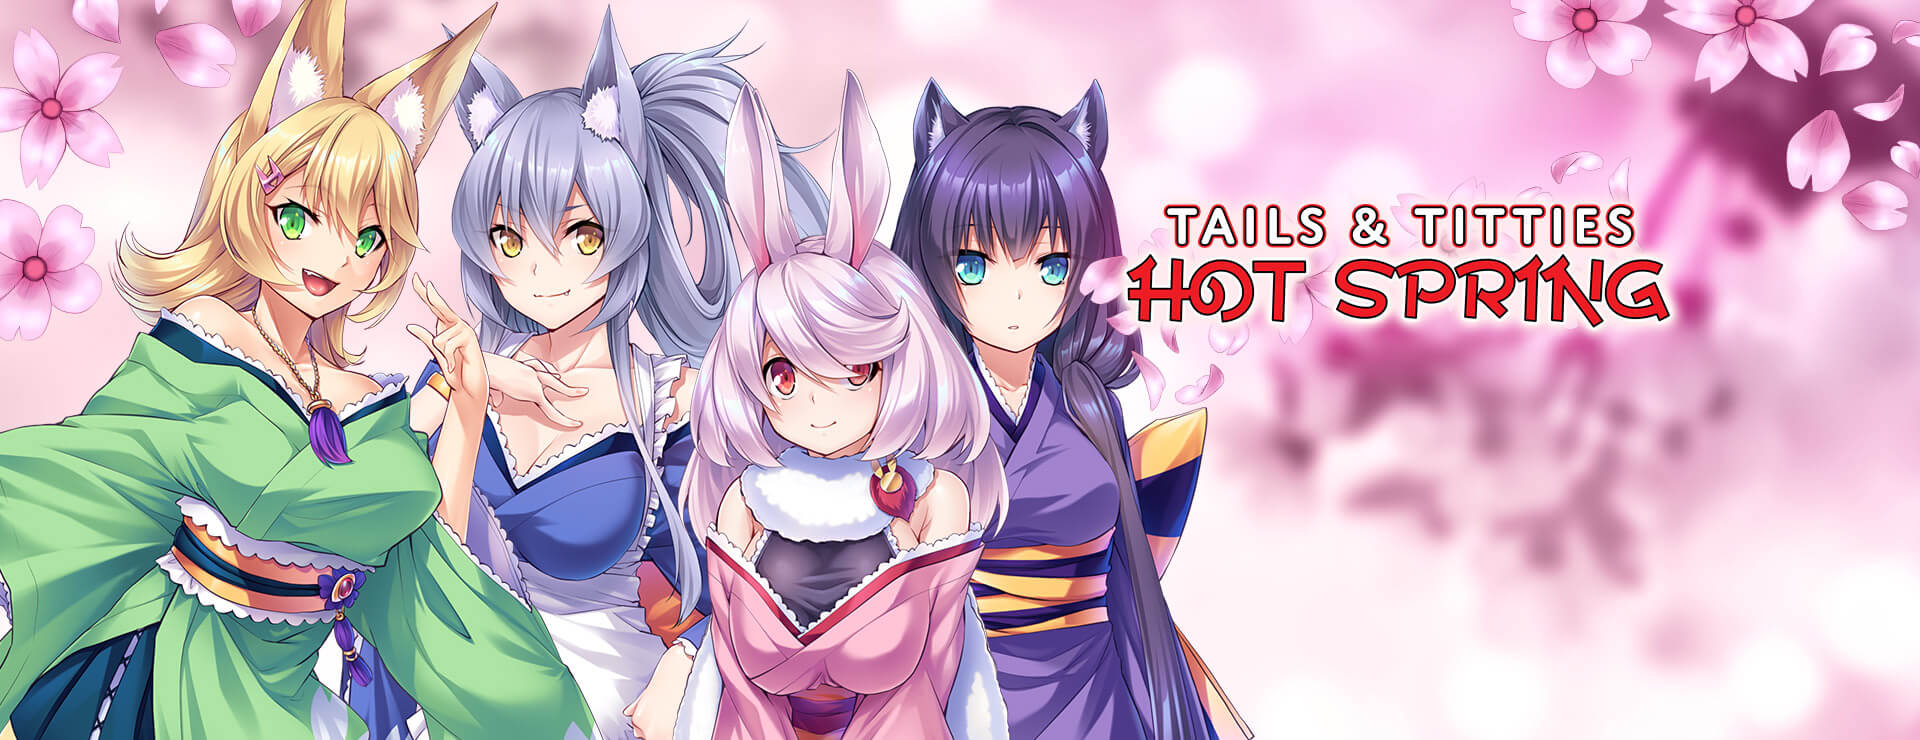 Tails & Titties Hot Spring - Visual Novel Game